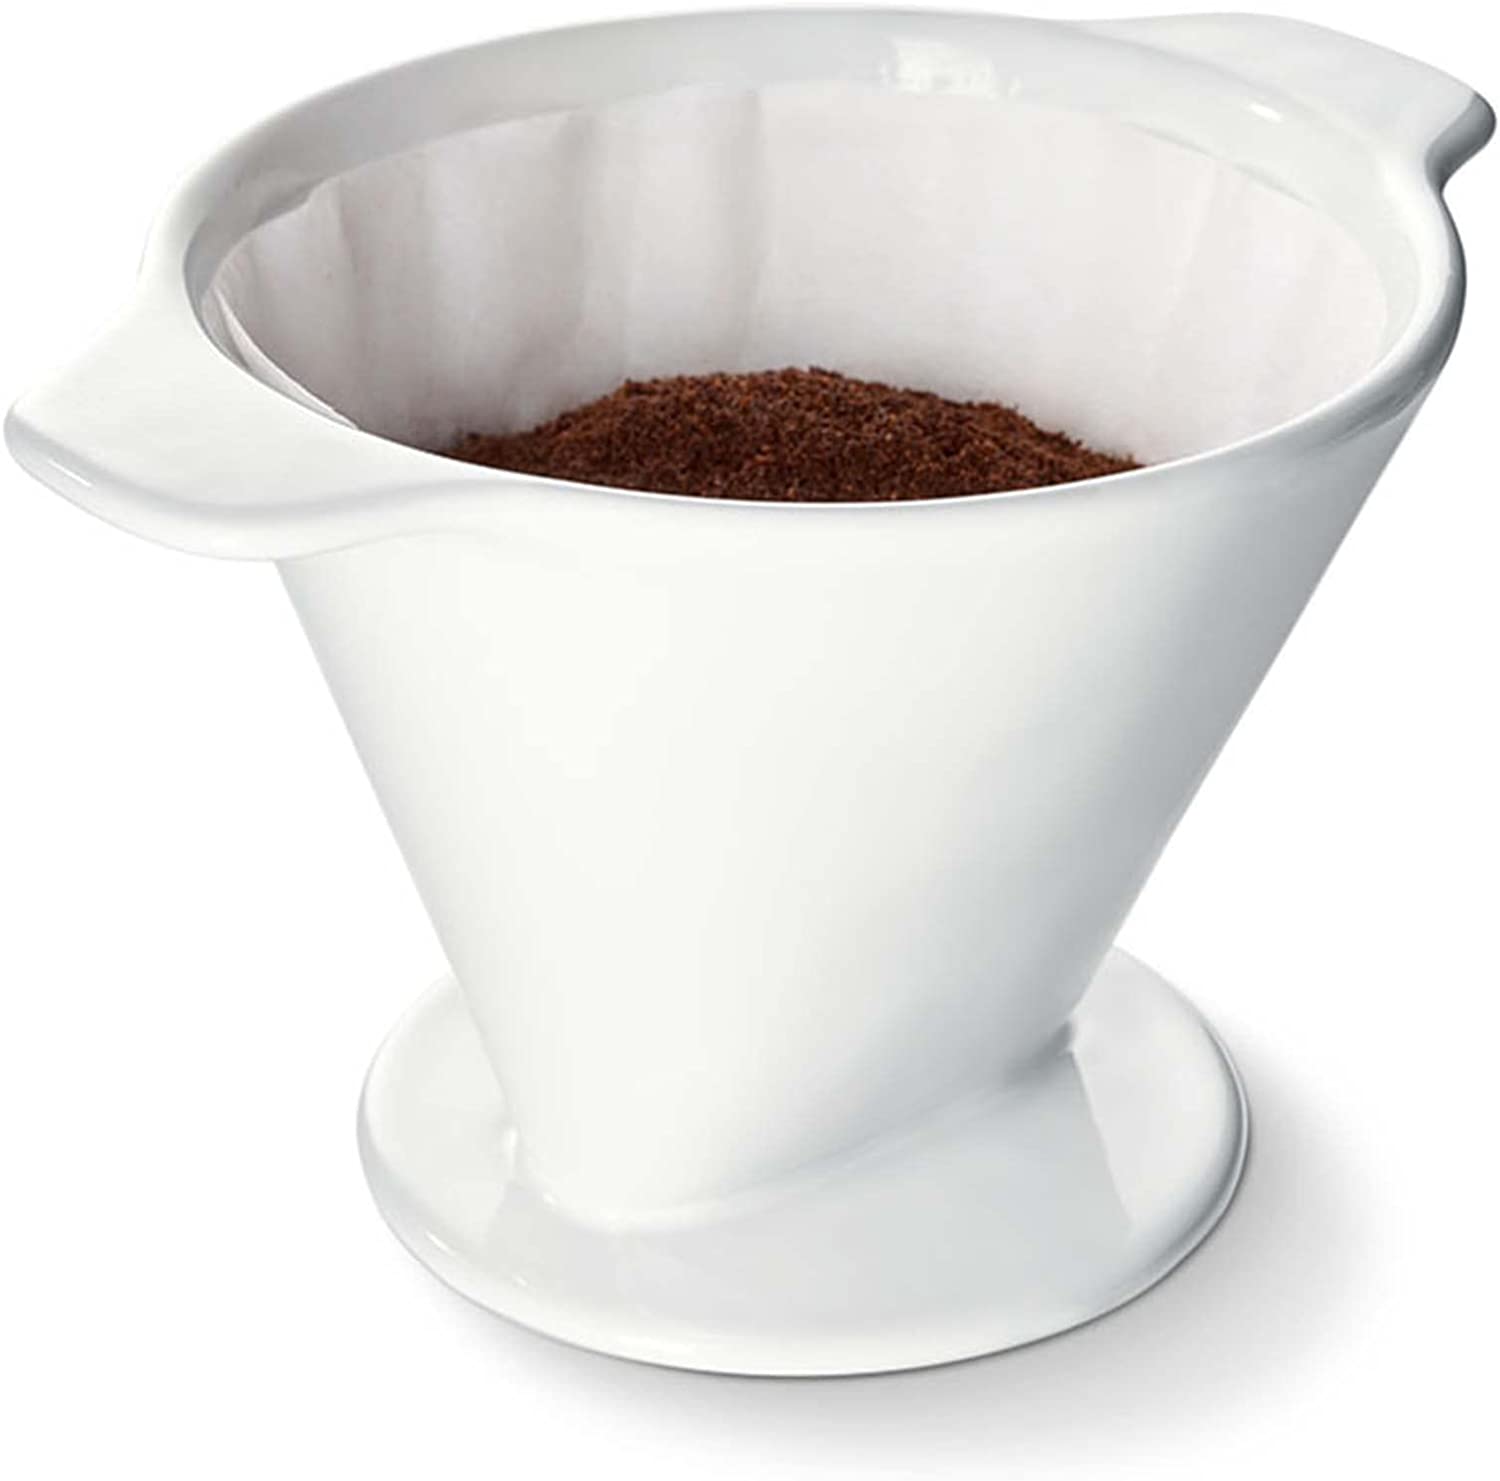 Tchibo Coffee filter, hand filter, hand infusion, filter size 1x4, dishwasher-safe, ceramic, white